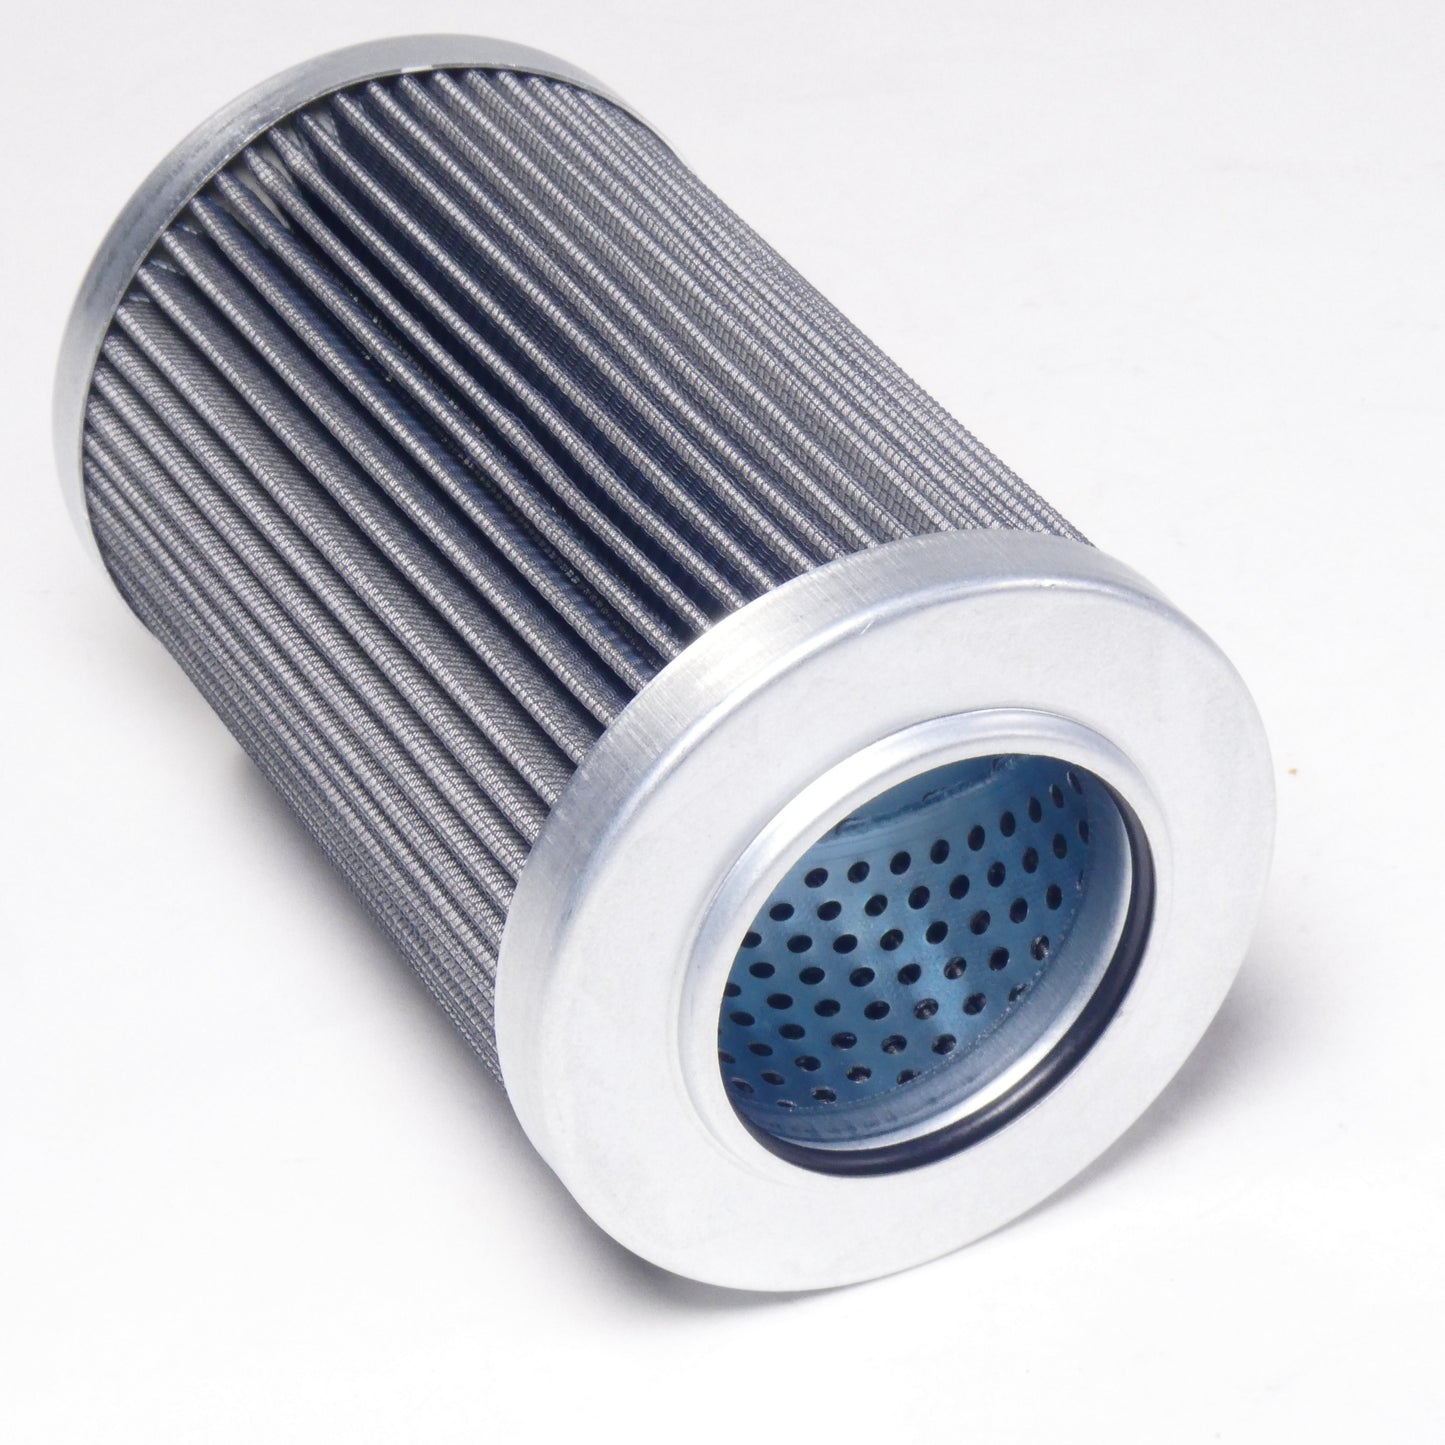 Hydrafil Replacement Filter Element for EPE 1.0020AS20-A00-0-P